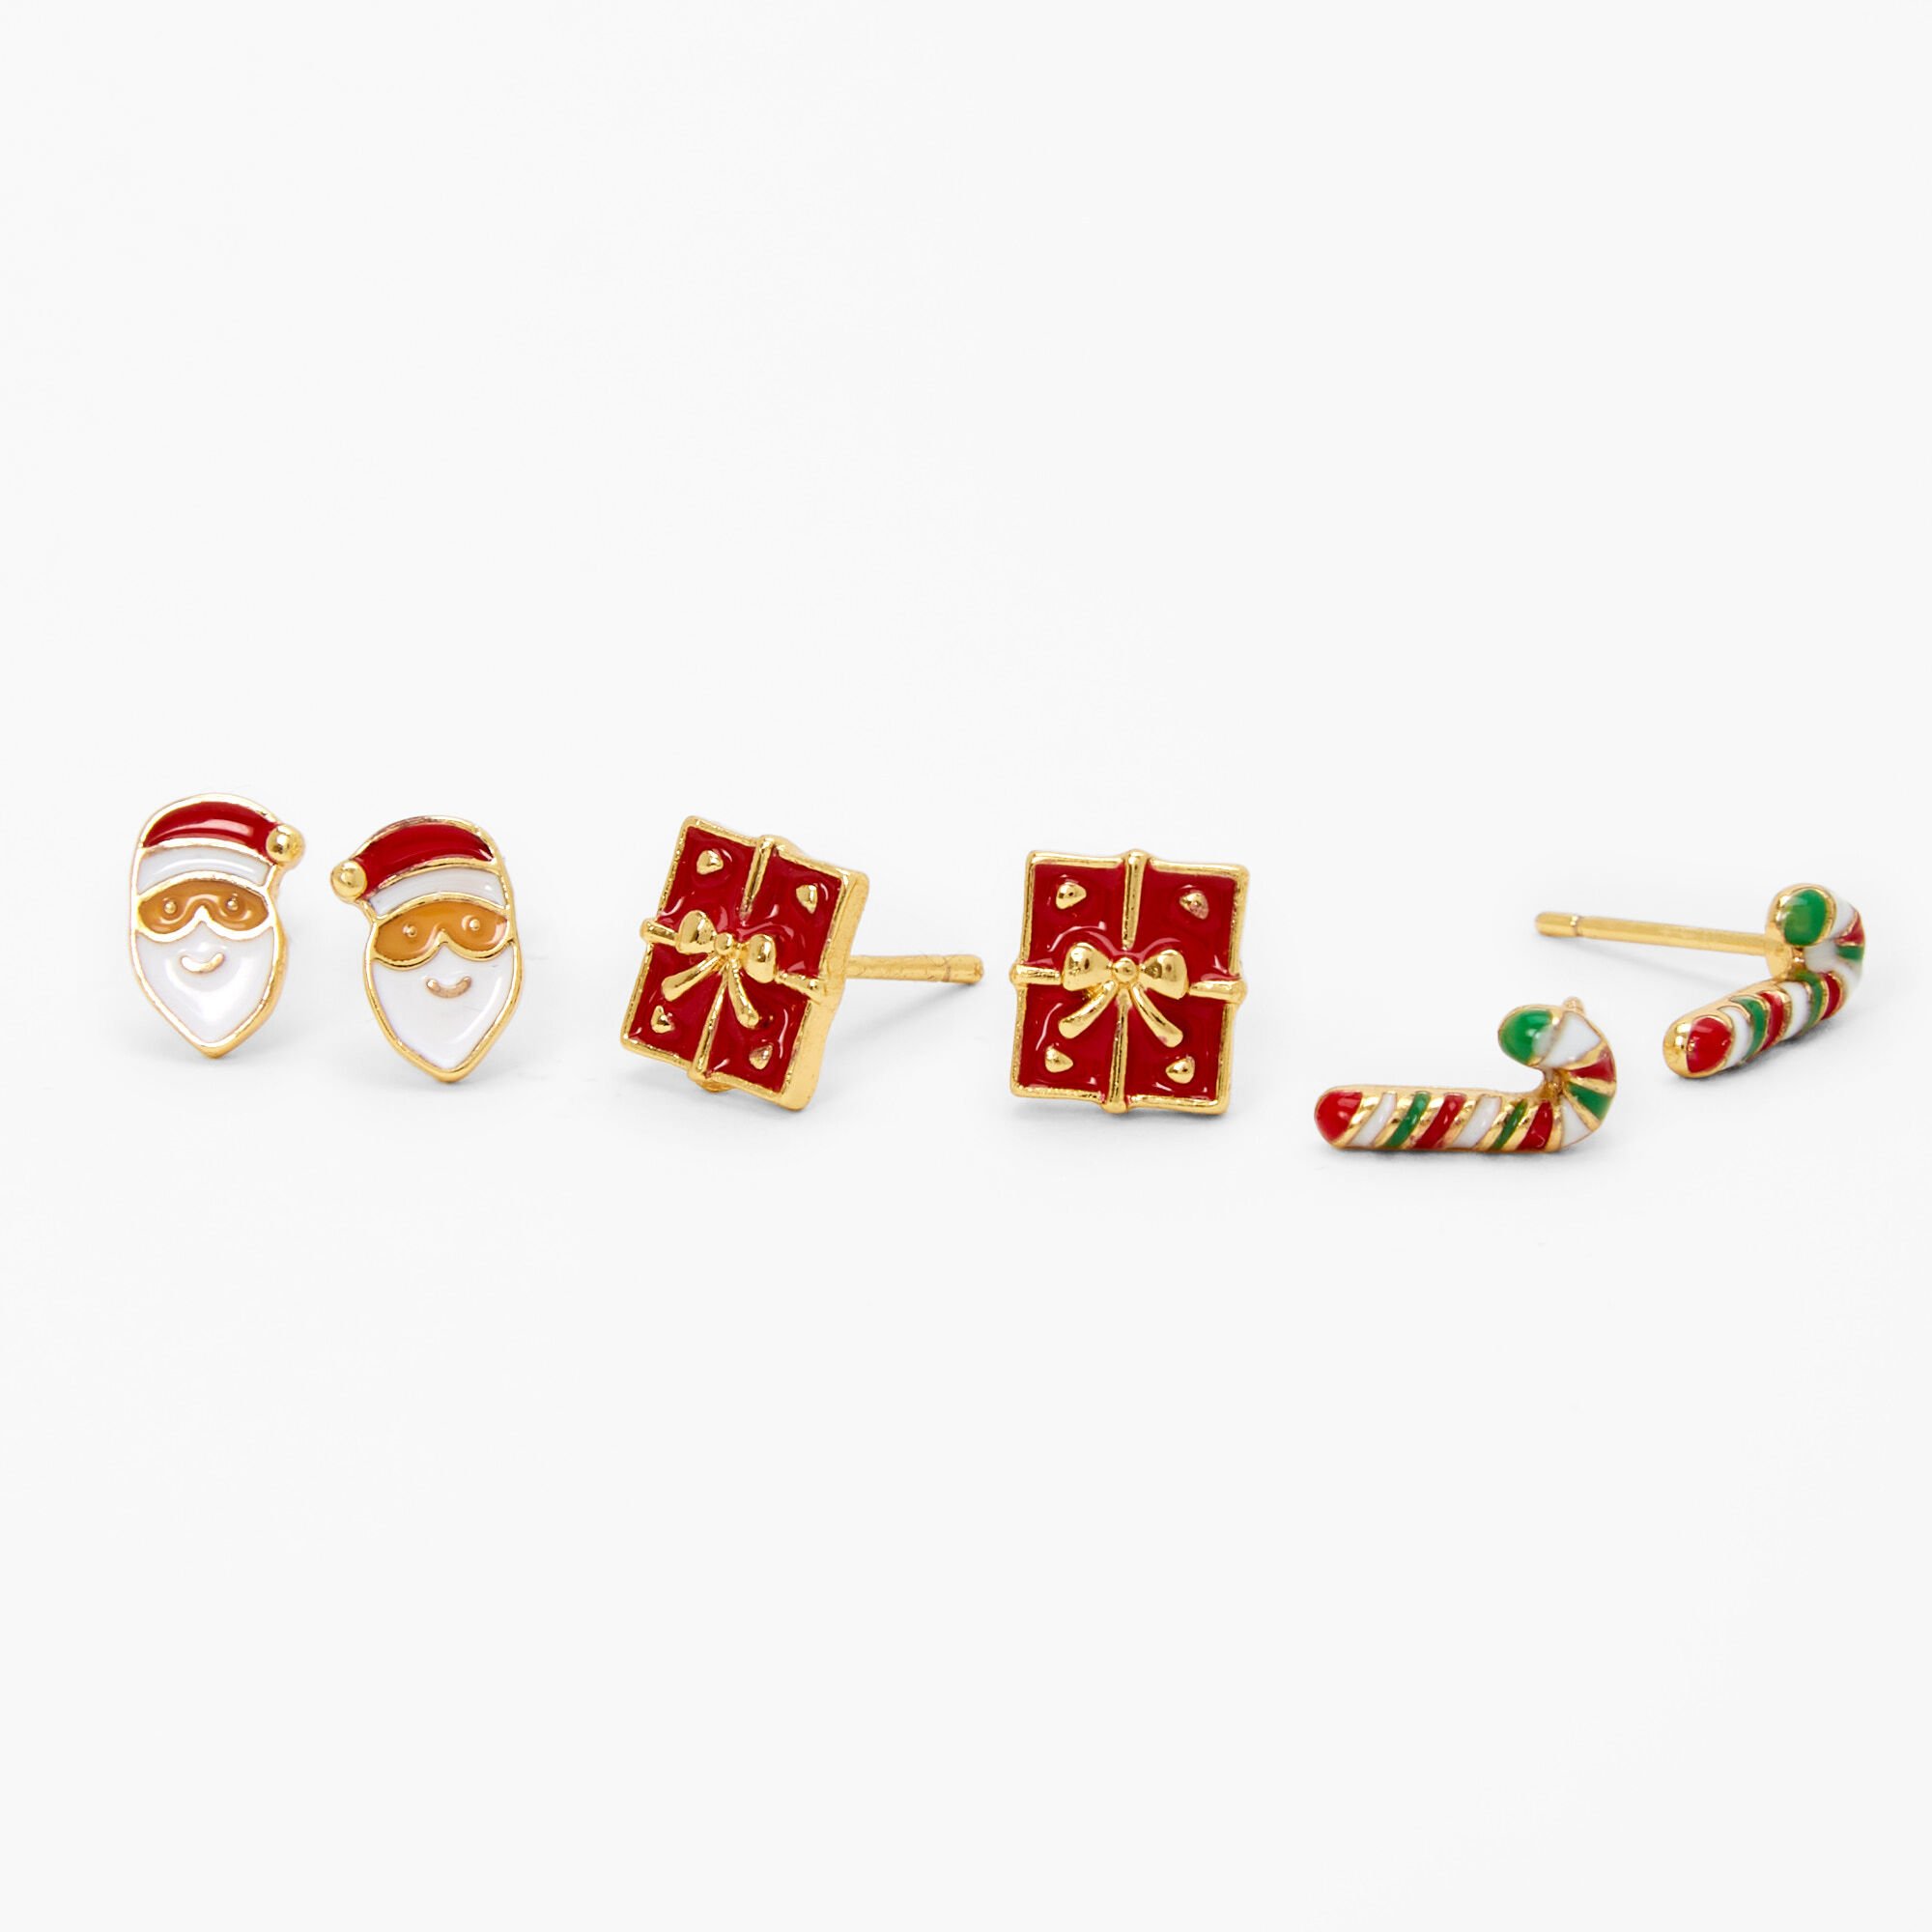 Festive 1 Gold Plated Bangle Christmas Earrings With Candy Cane and Bow